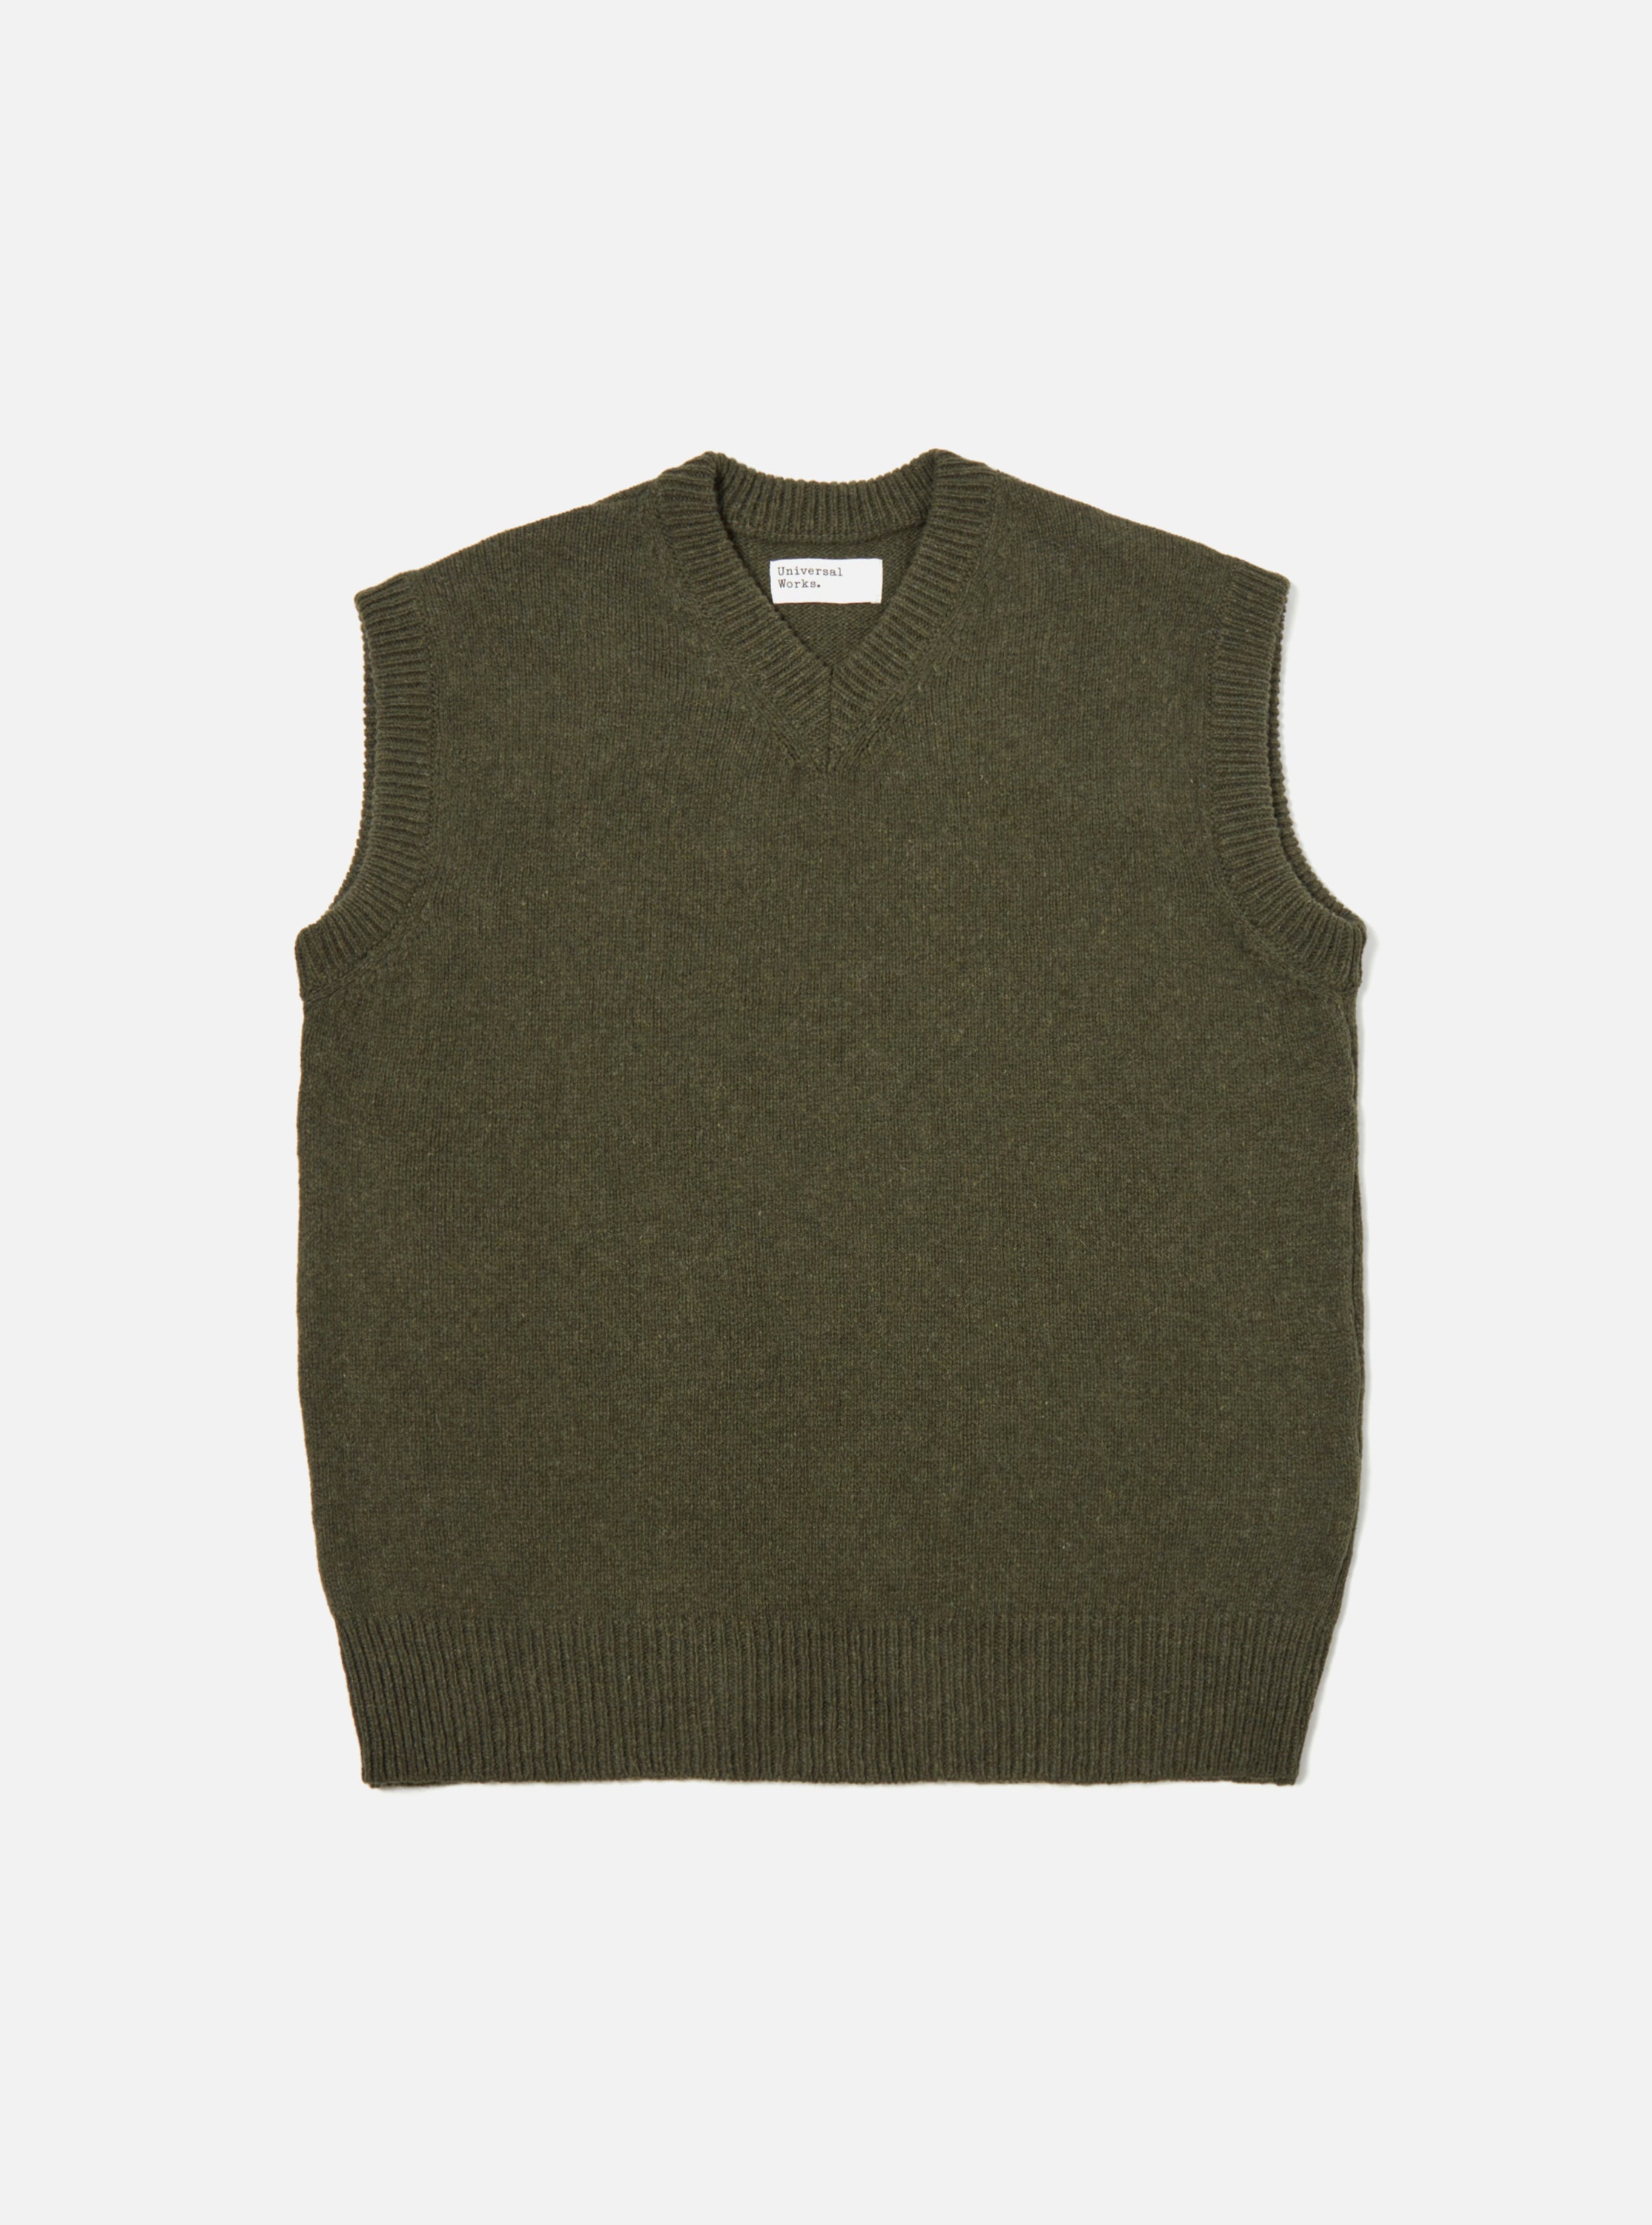 Universal Works Sweater Vest in Olive Eco Wool